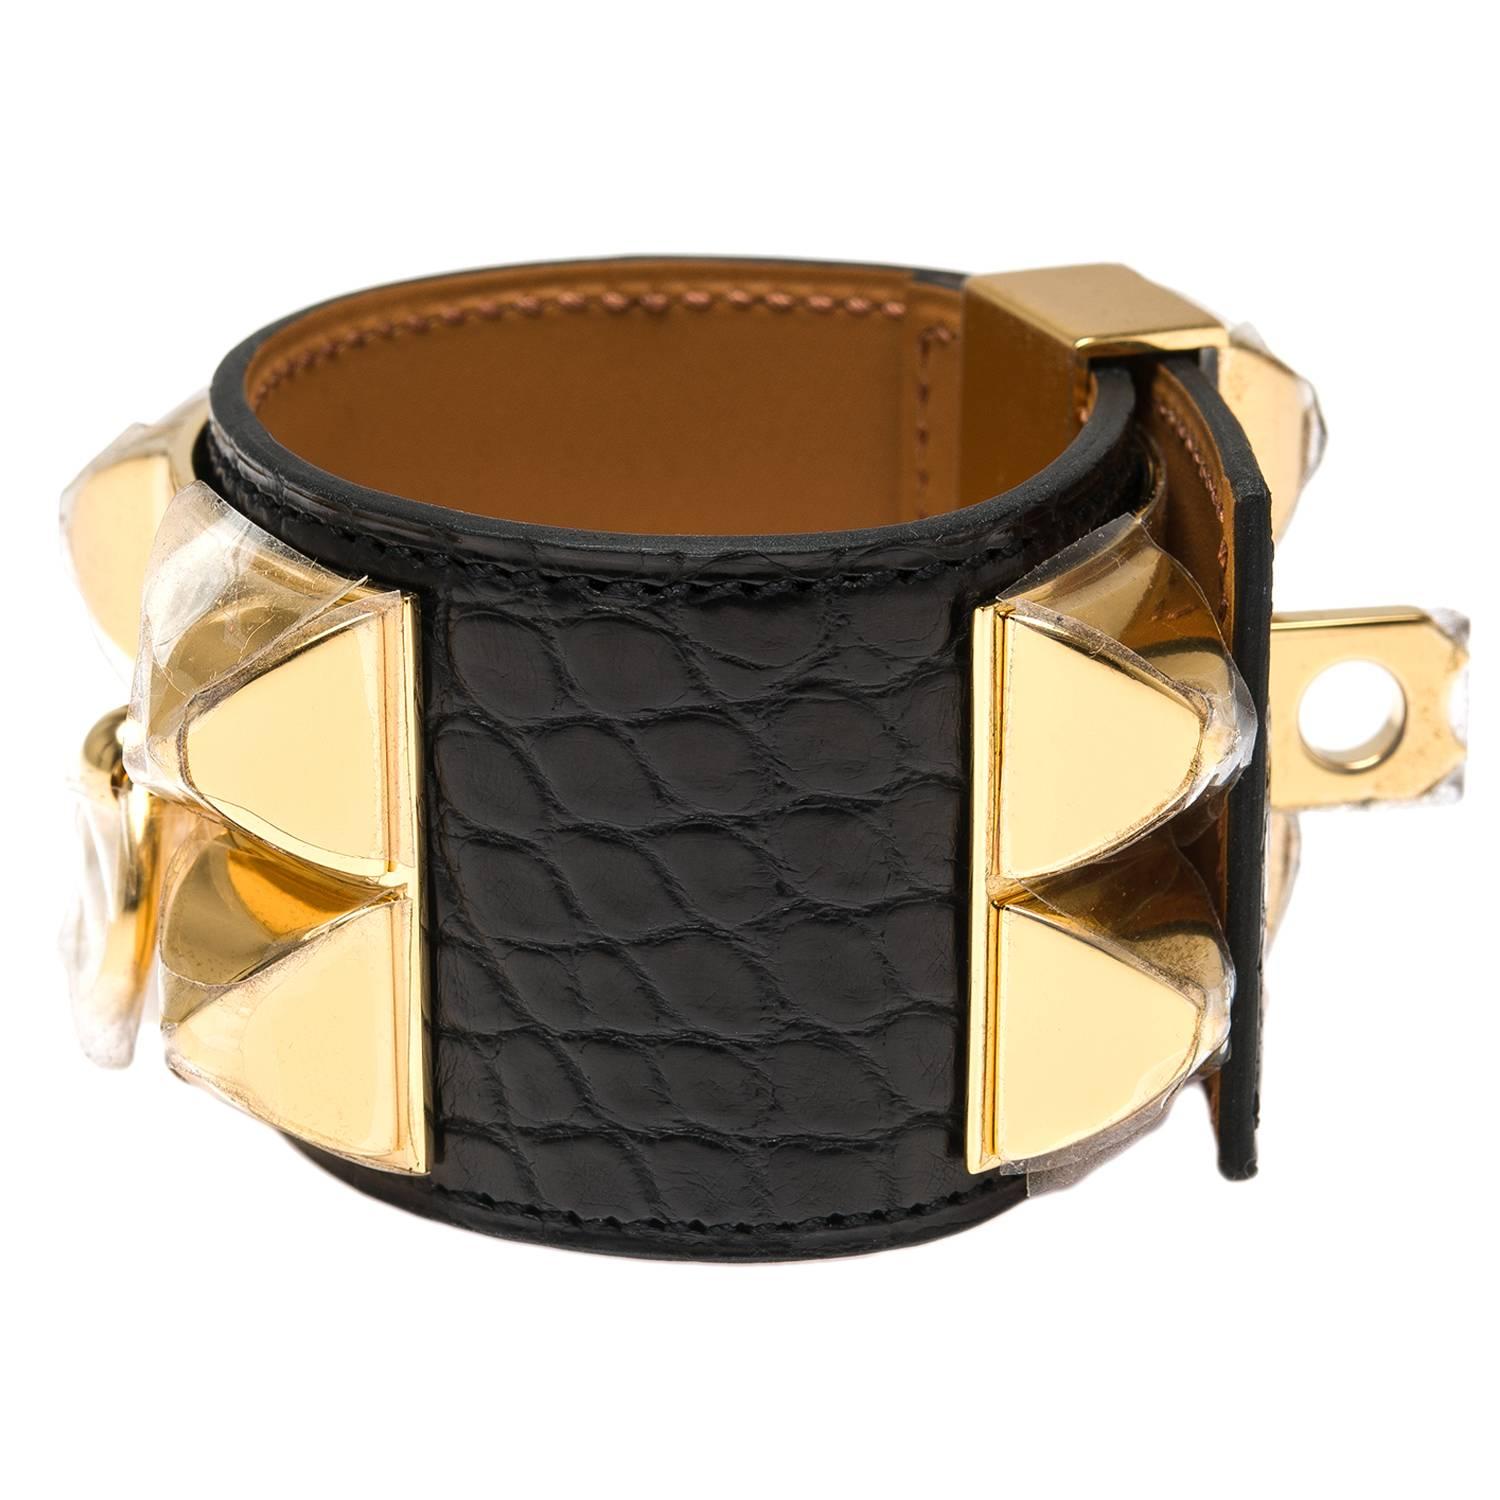 Hermes Collier de Chien (CDC) bracelet in black matte alligator with gold plated hardware in size Small.

This adjustable bracelet has a front gold plated plate of four gold pyramid studs and a center ring and a rear plate with four slots with a